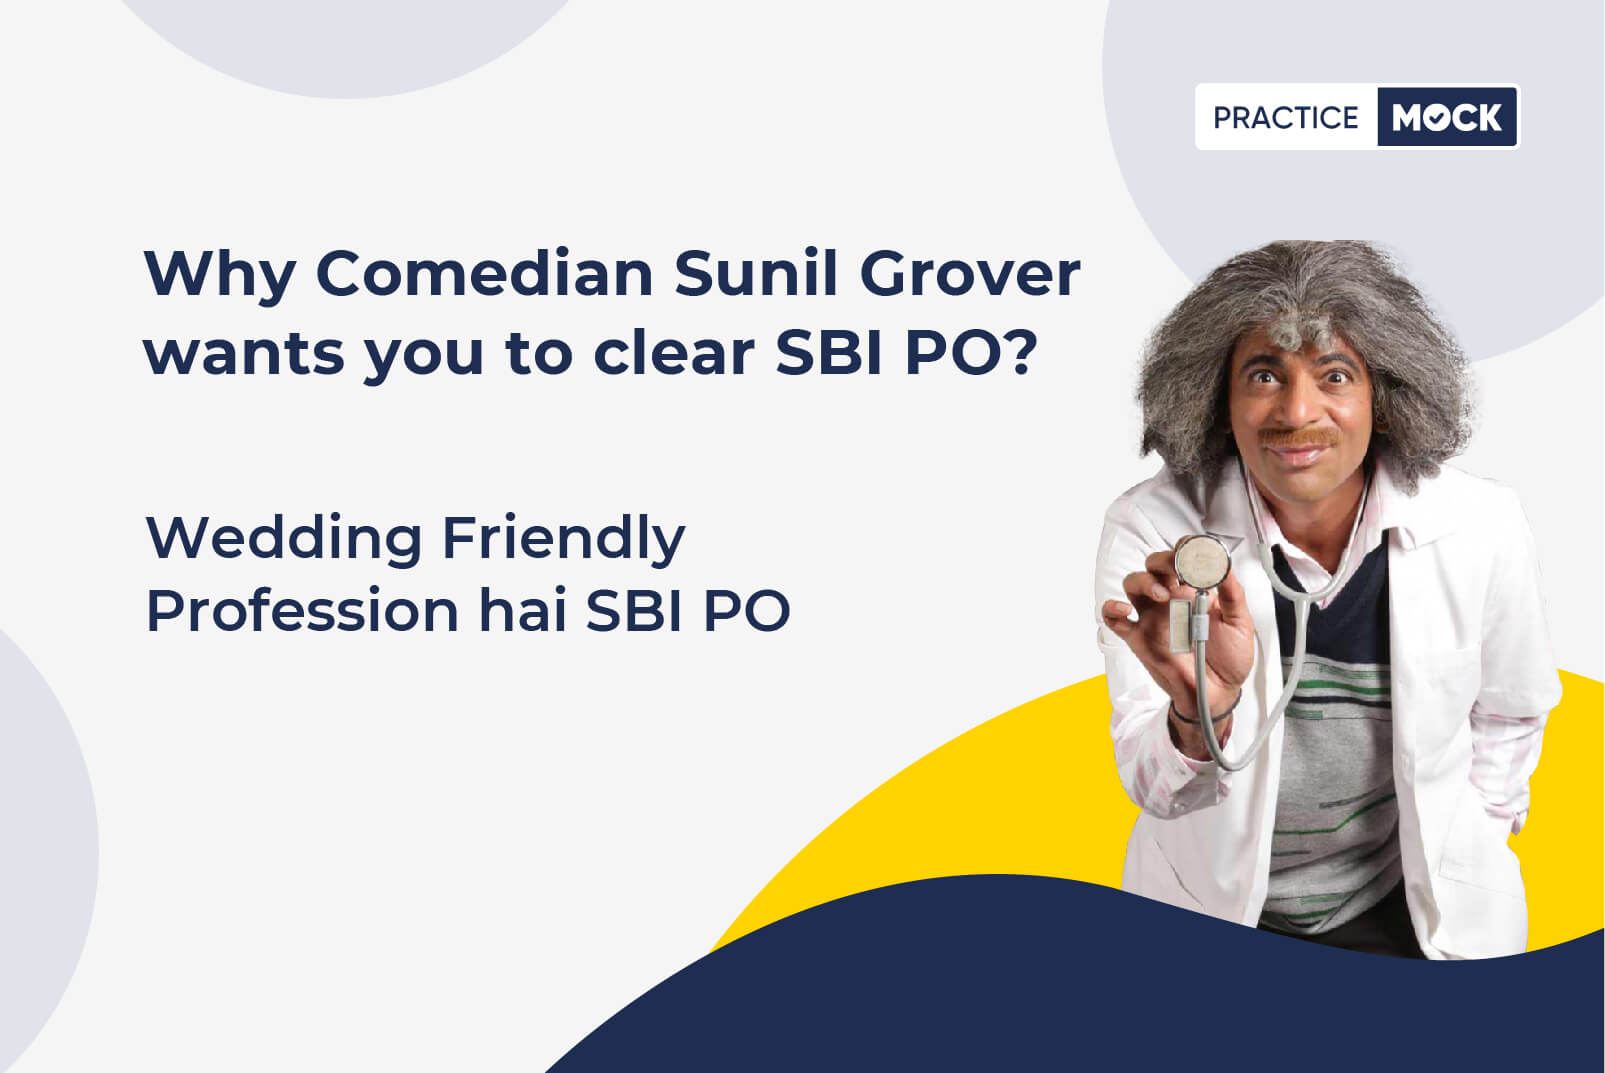 Why Comedian Sunil Grover wants you to clear SBI PO?